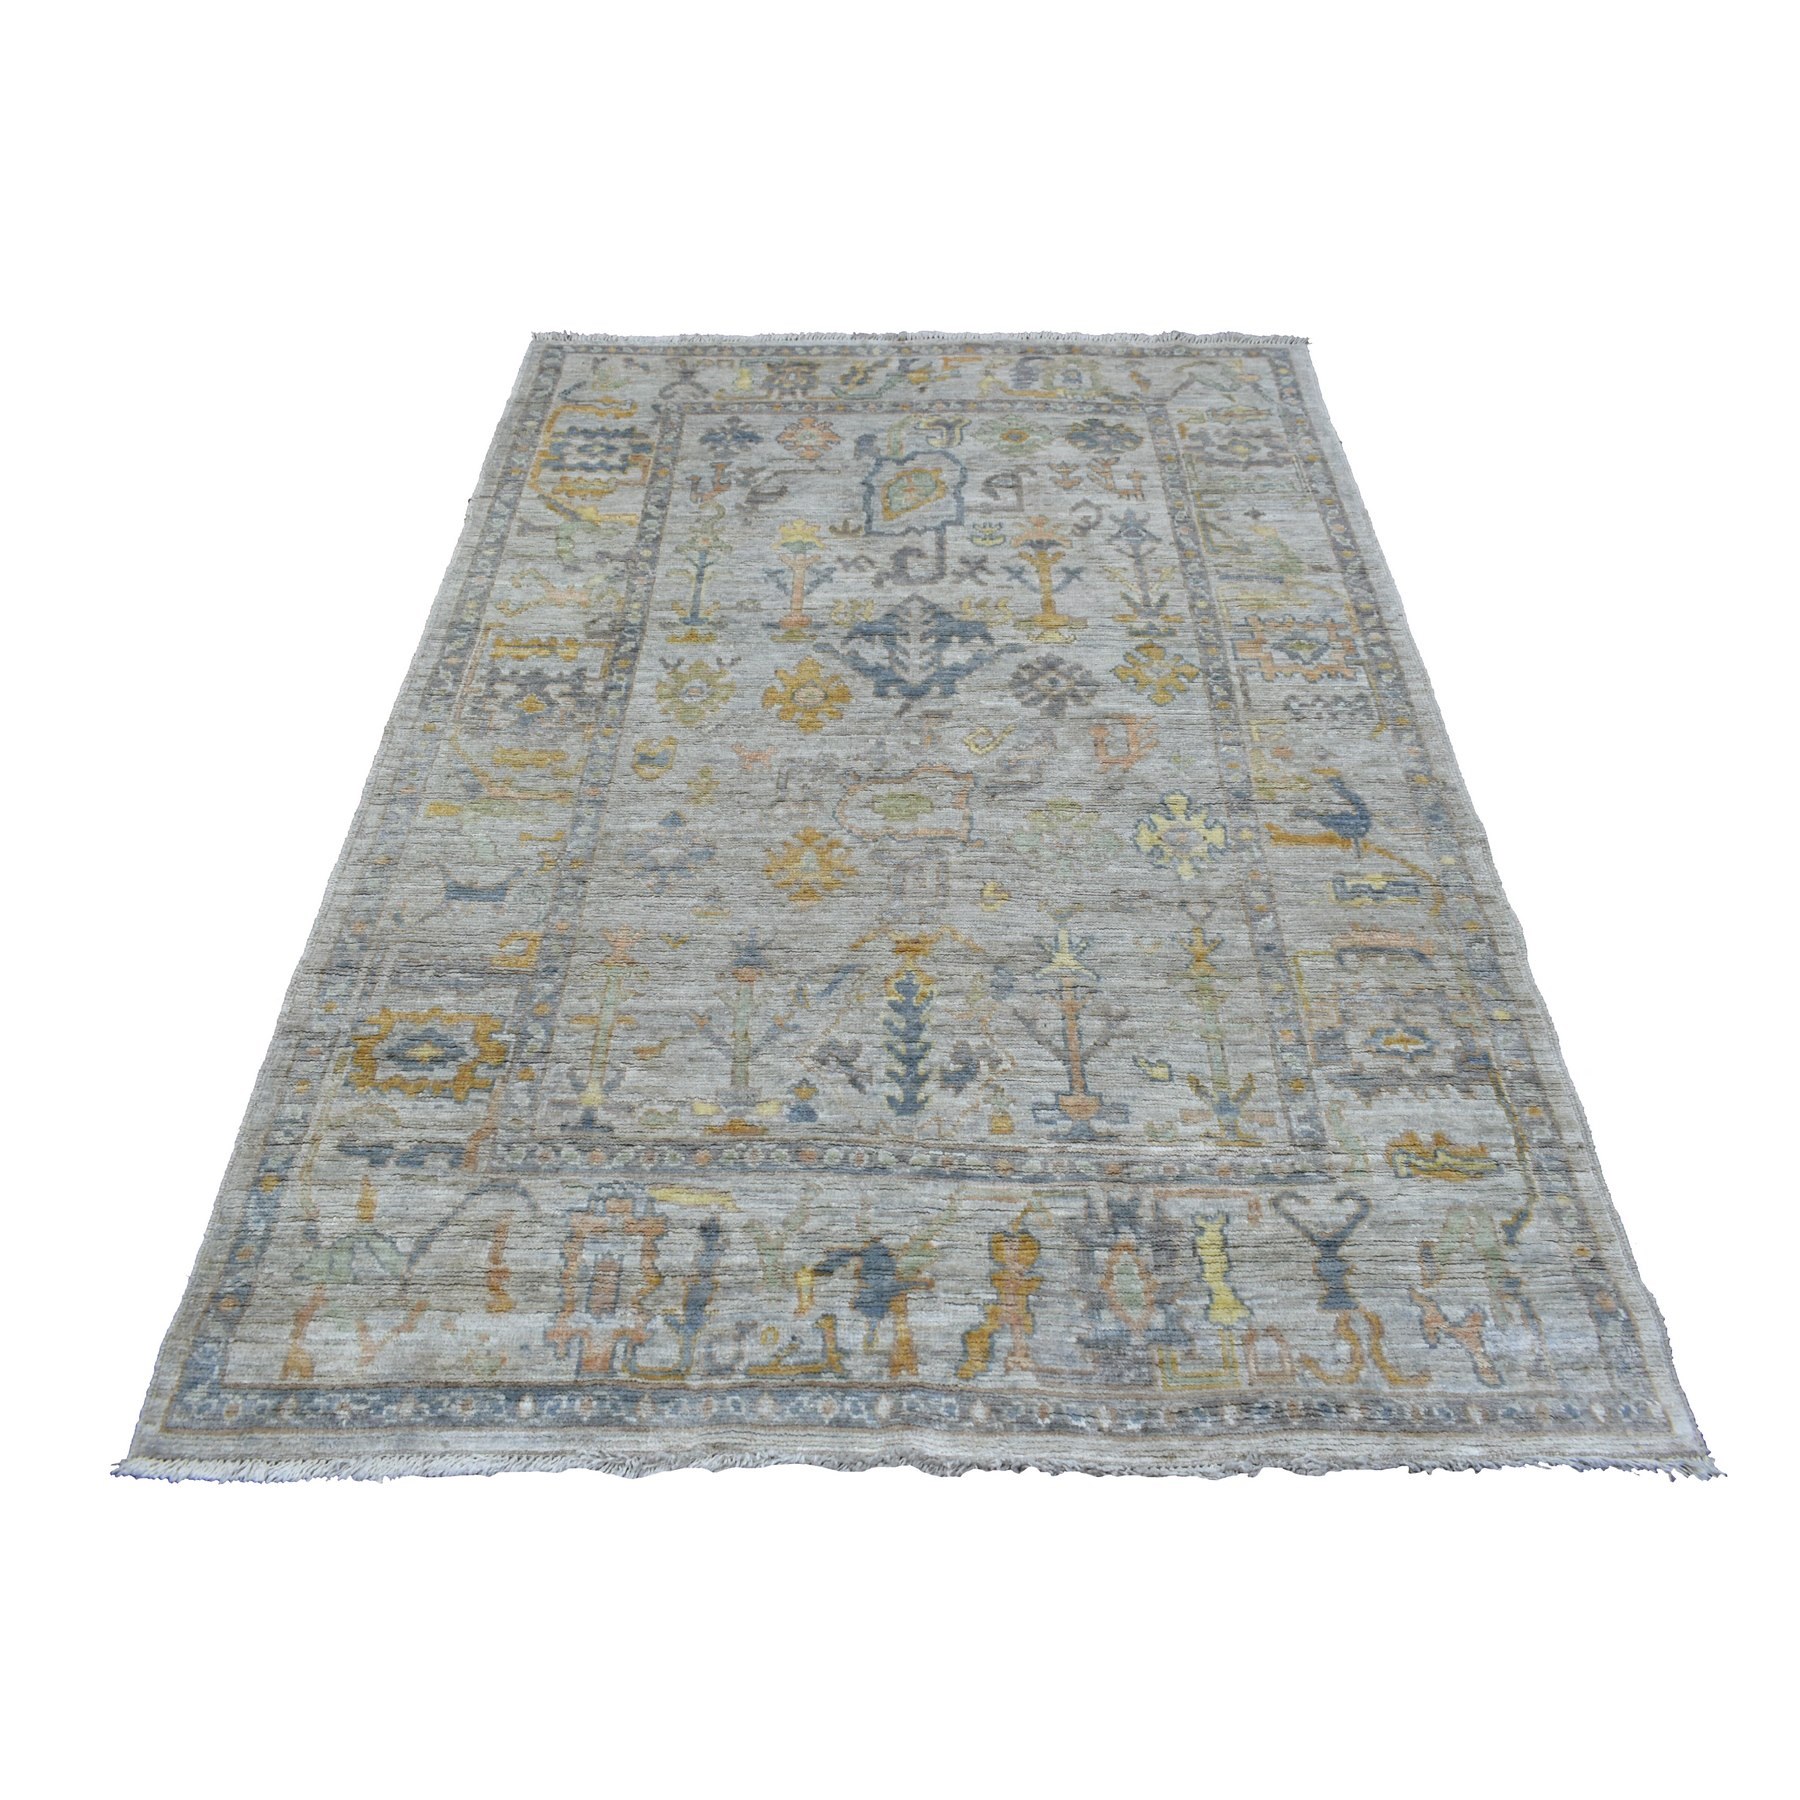 4'10"x6'10" Hand Woven Gray Afghan Angora Ushak with Geometric Leaf Design Extremely Durable Oriental Rug 